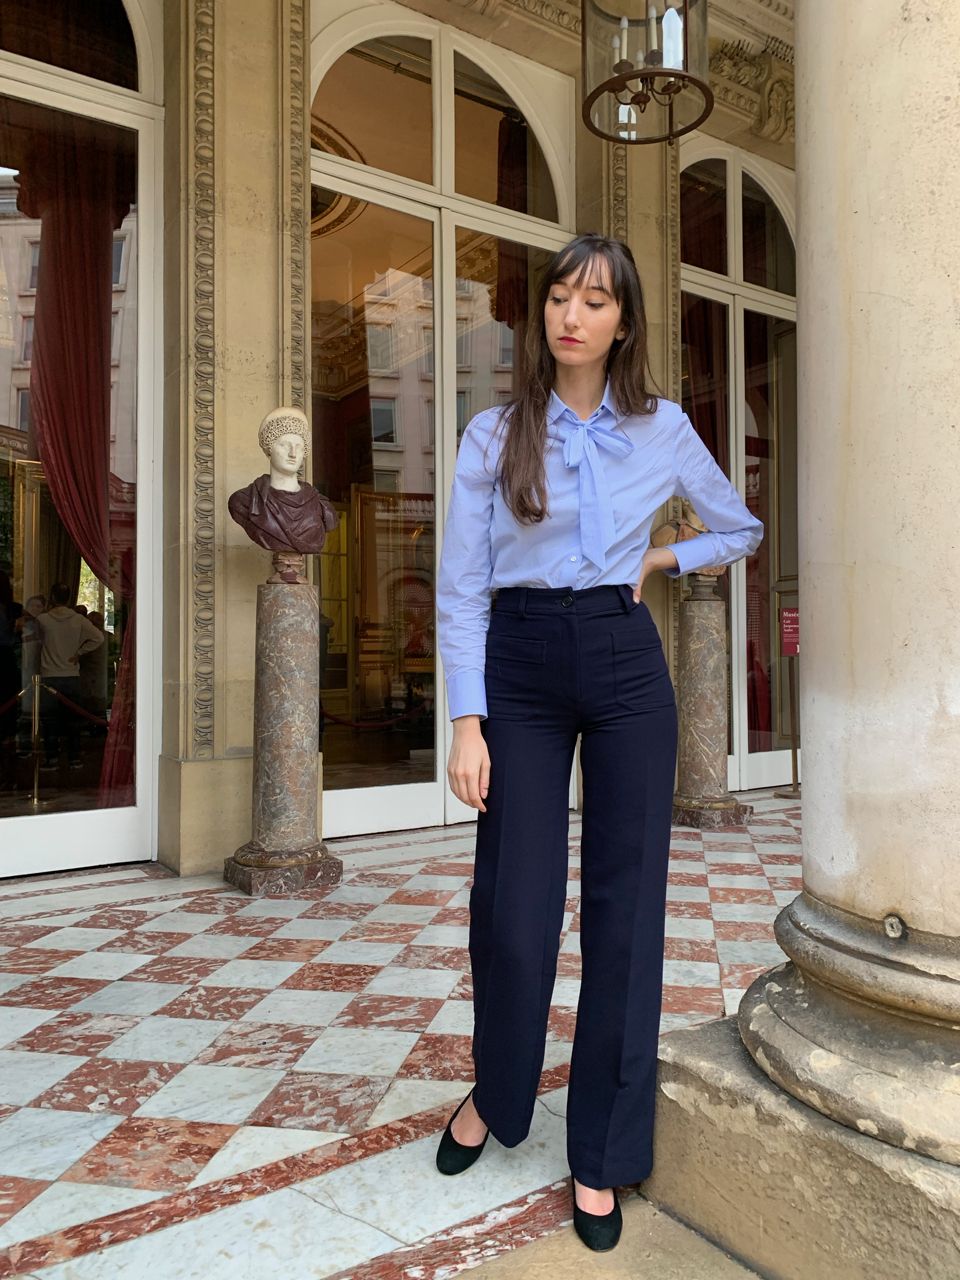 Early Fall Parisian Looks - Figaret top and Nathalie Dumeix pants